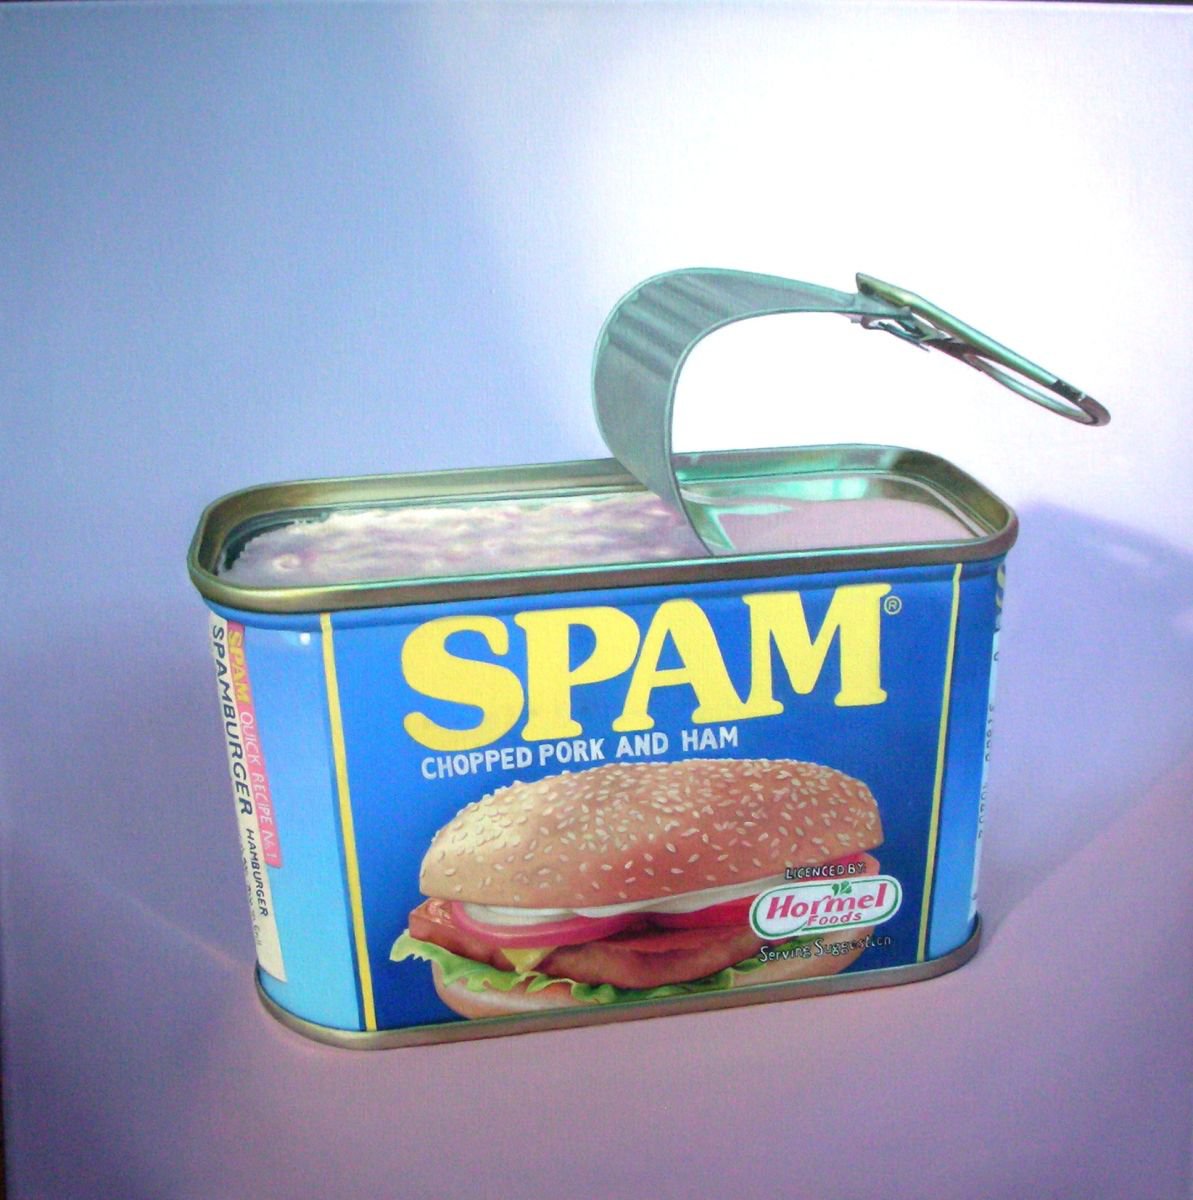 I Think therefore I’m SPAM! by Trinidad Ball